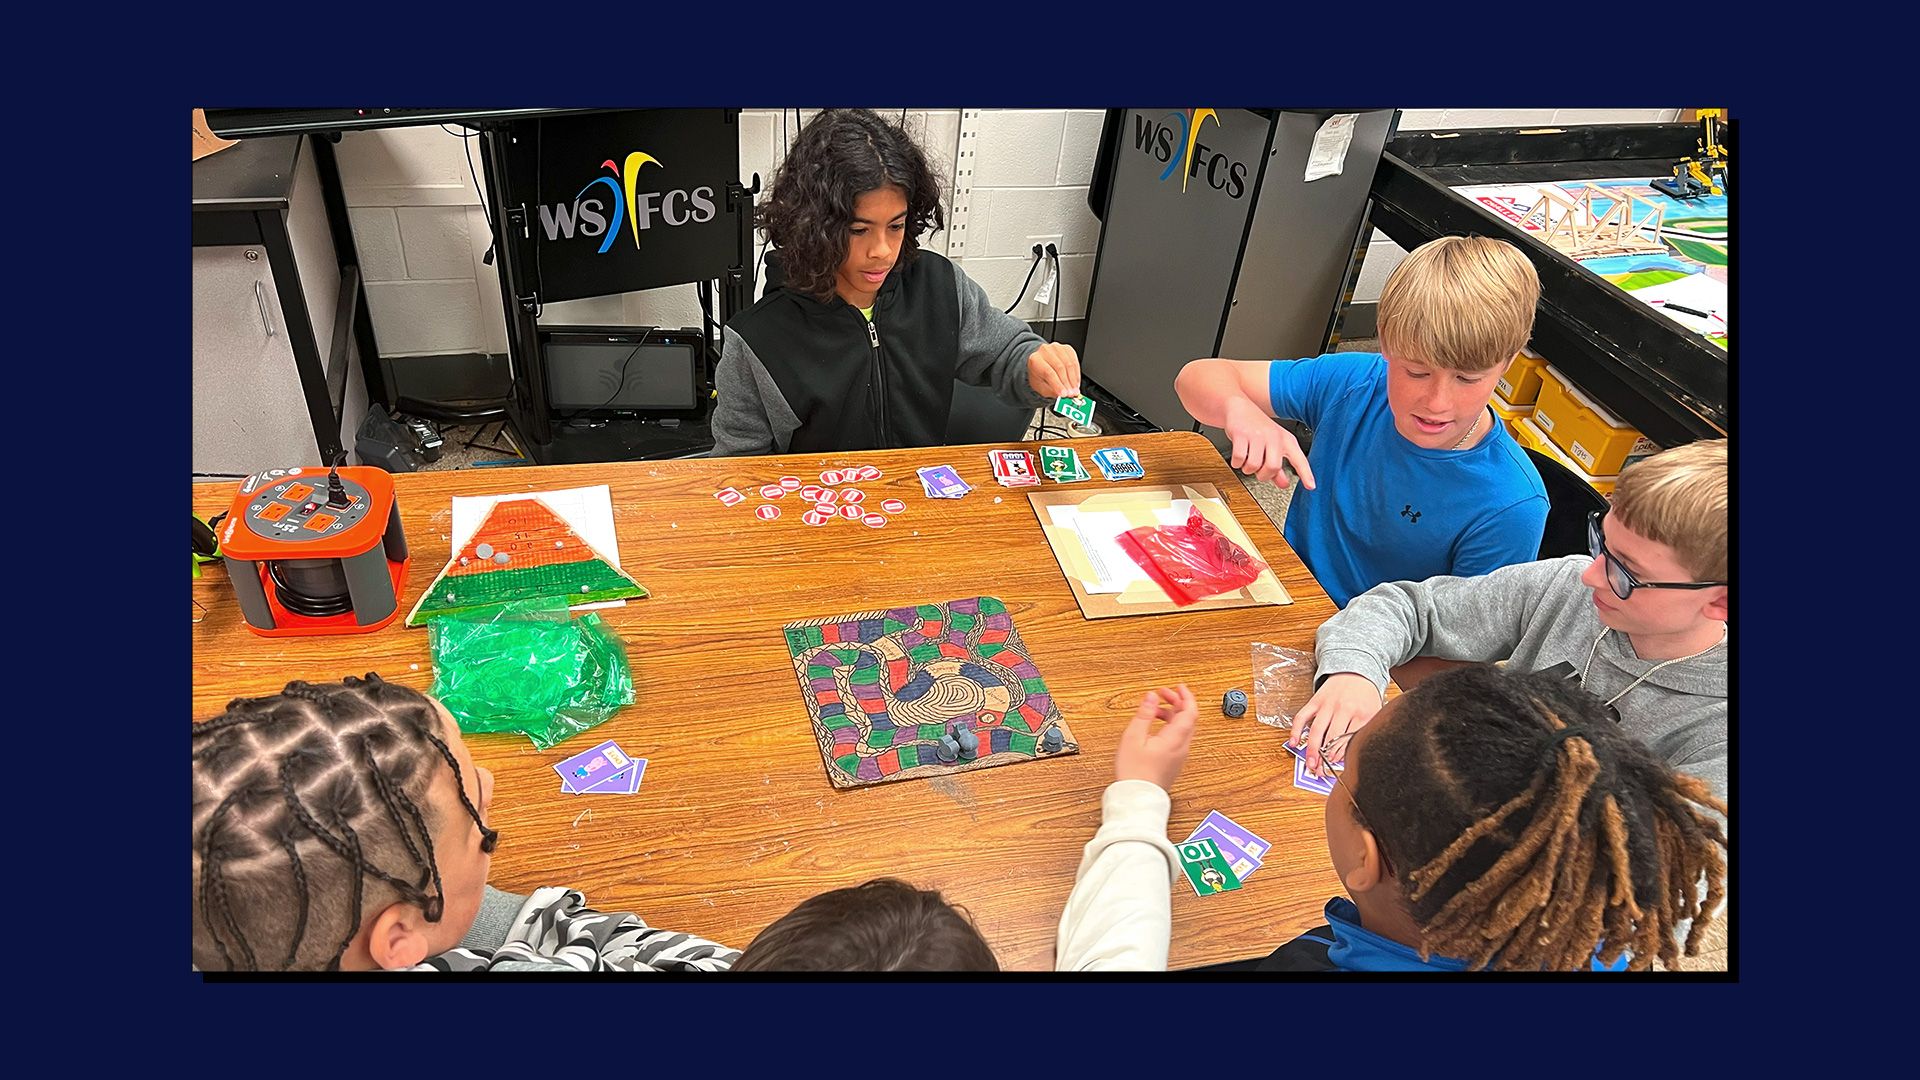 4 students playing a board game with 3D printed dice.